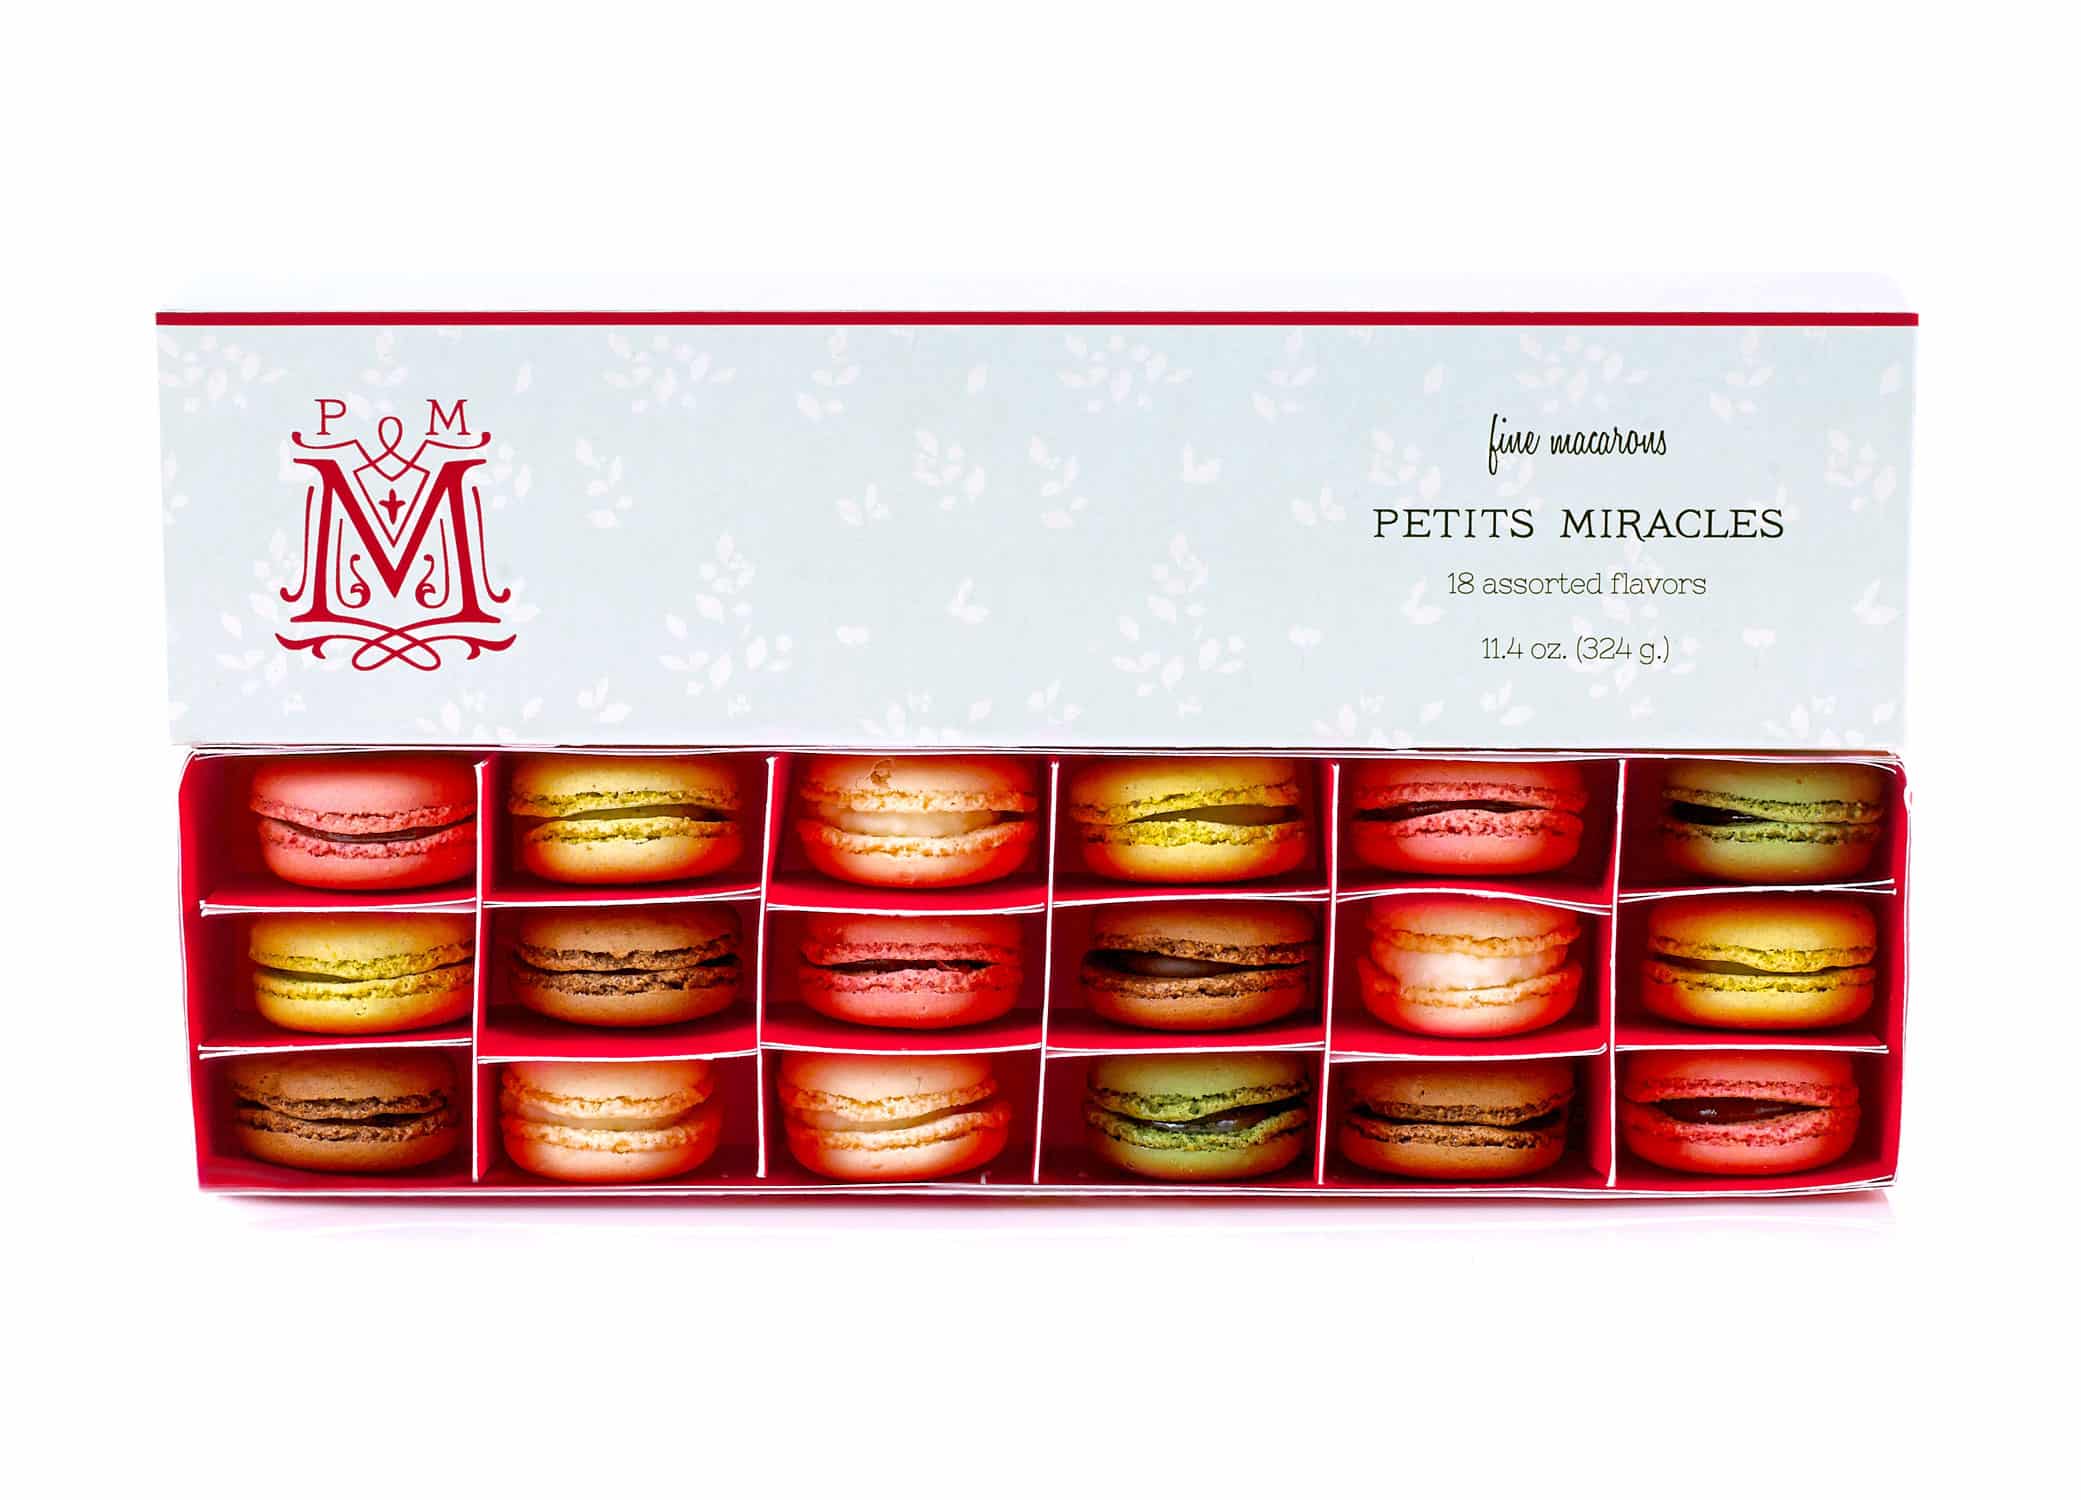 Petits Miracles packaging design with macaroons in the box and swirls around "M" icon next to type.